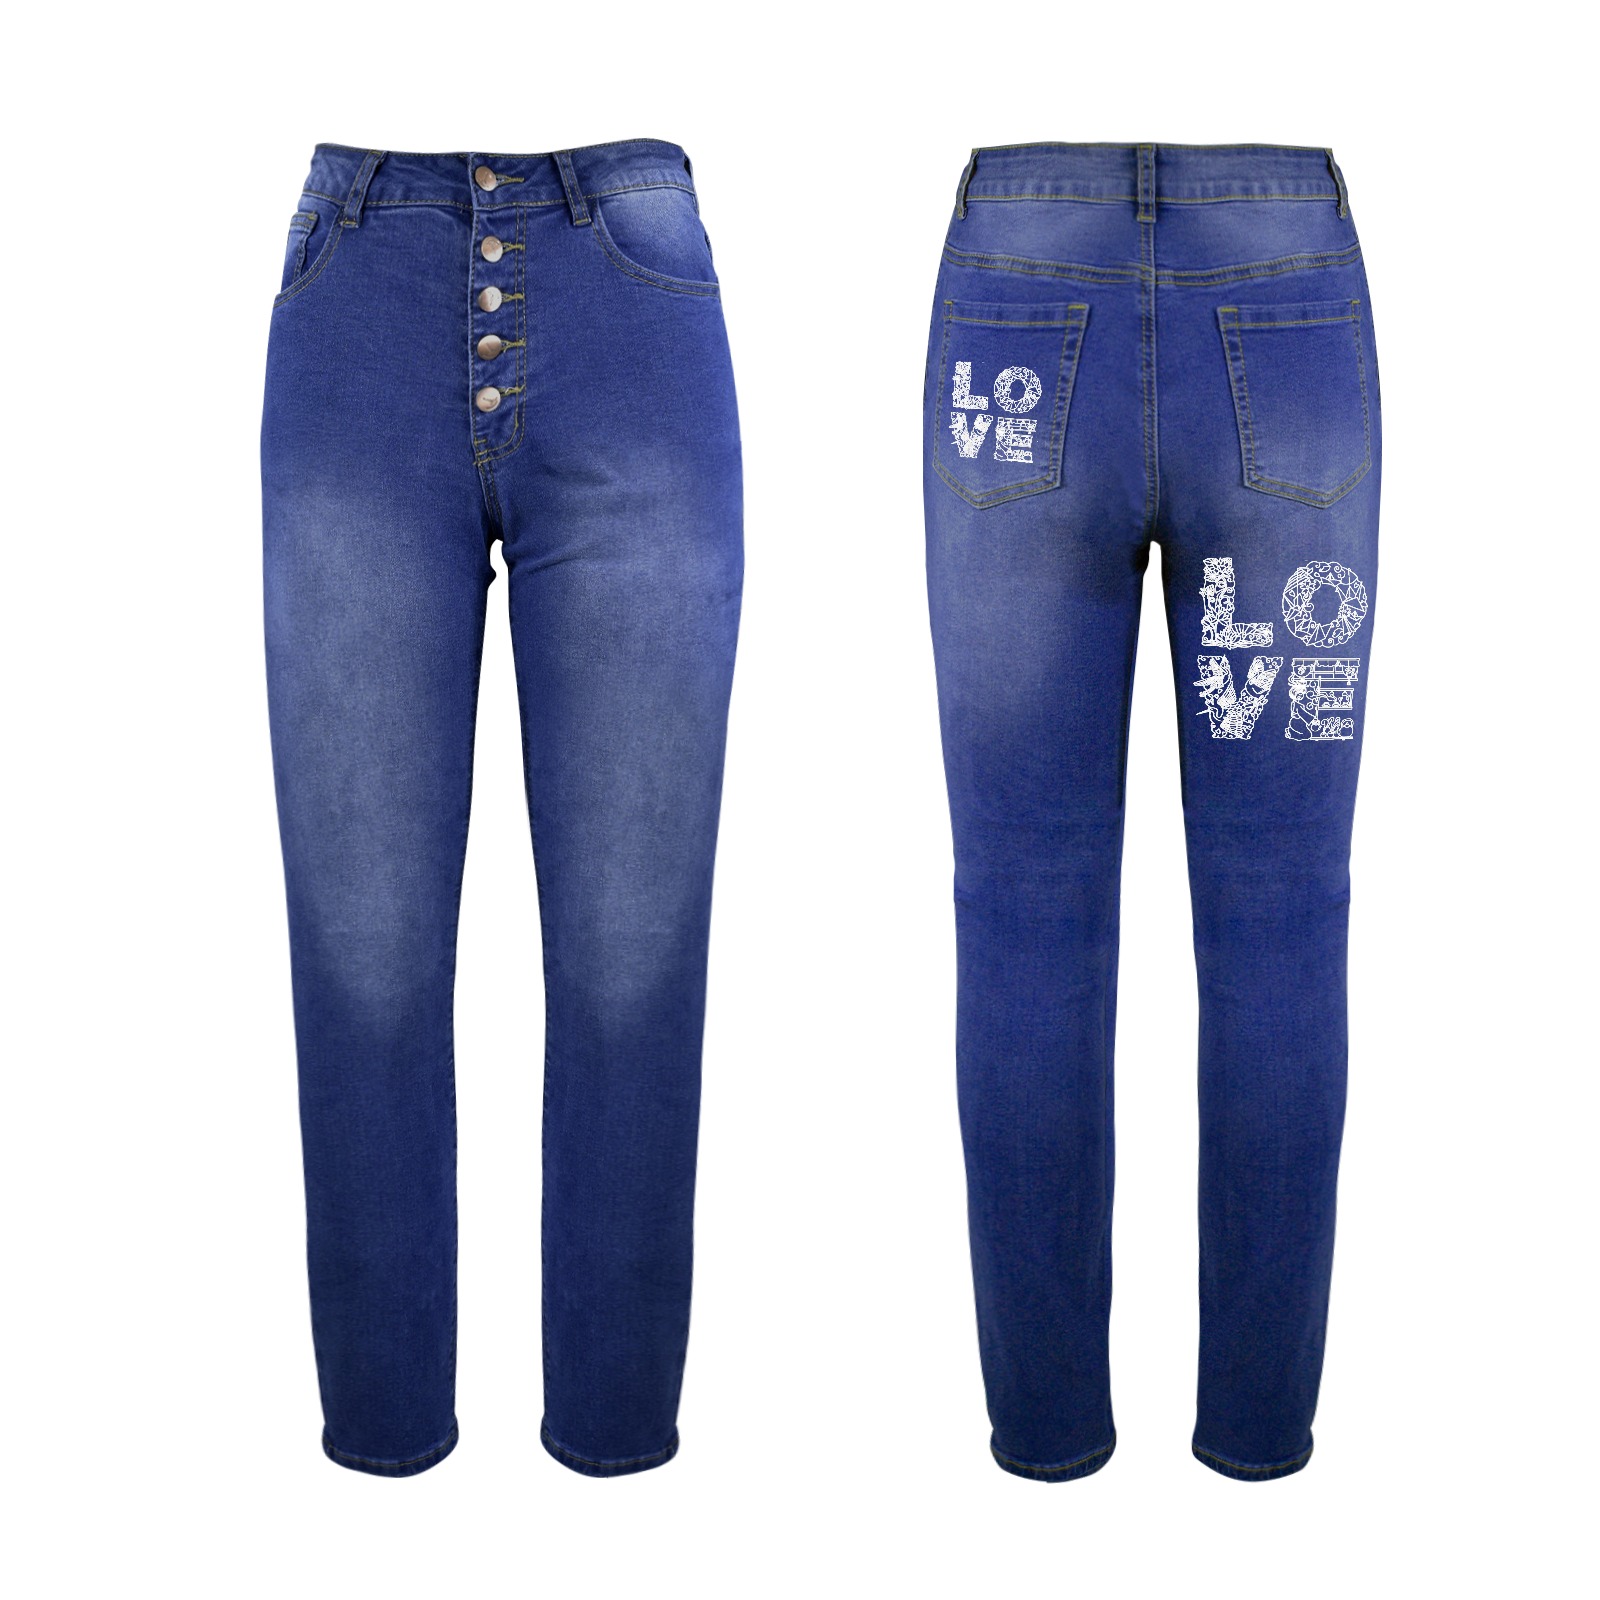 White word LOVE in Japanese-styled decorative font Women's Jeans (Back Printing)